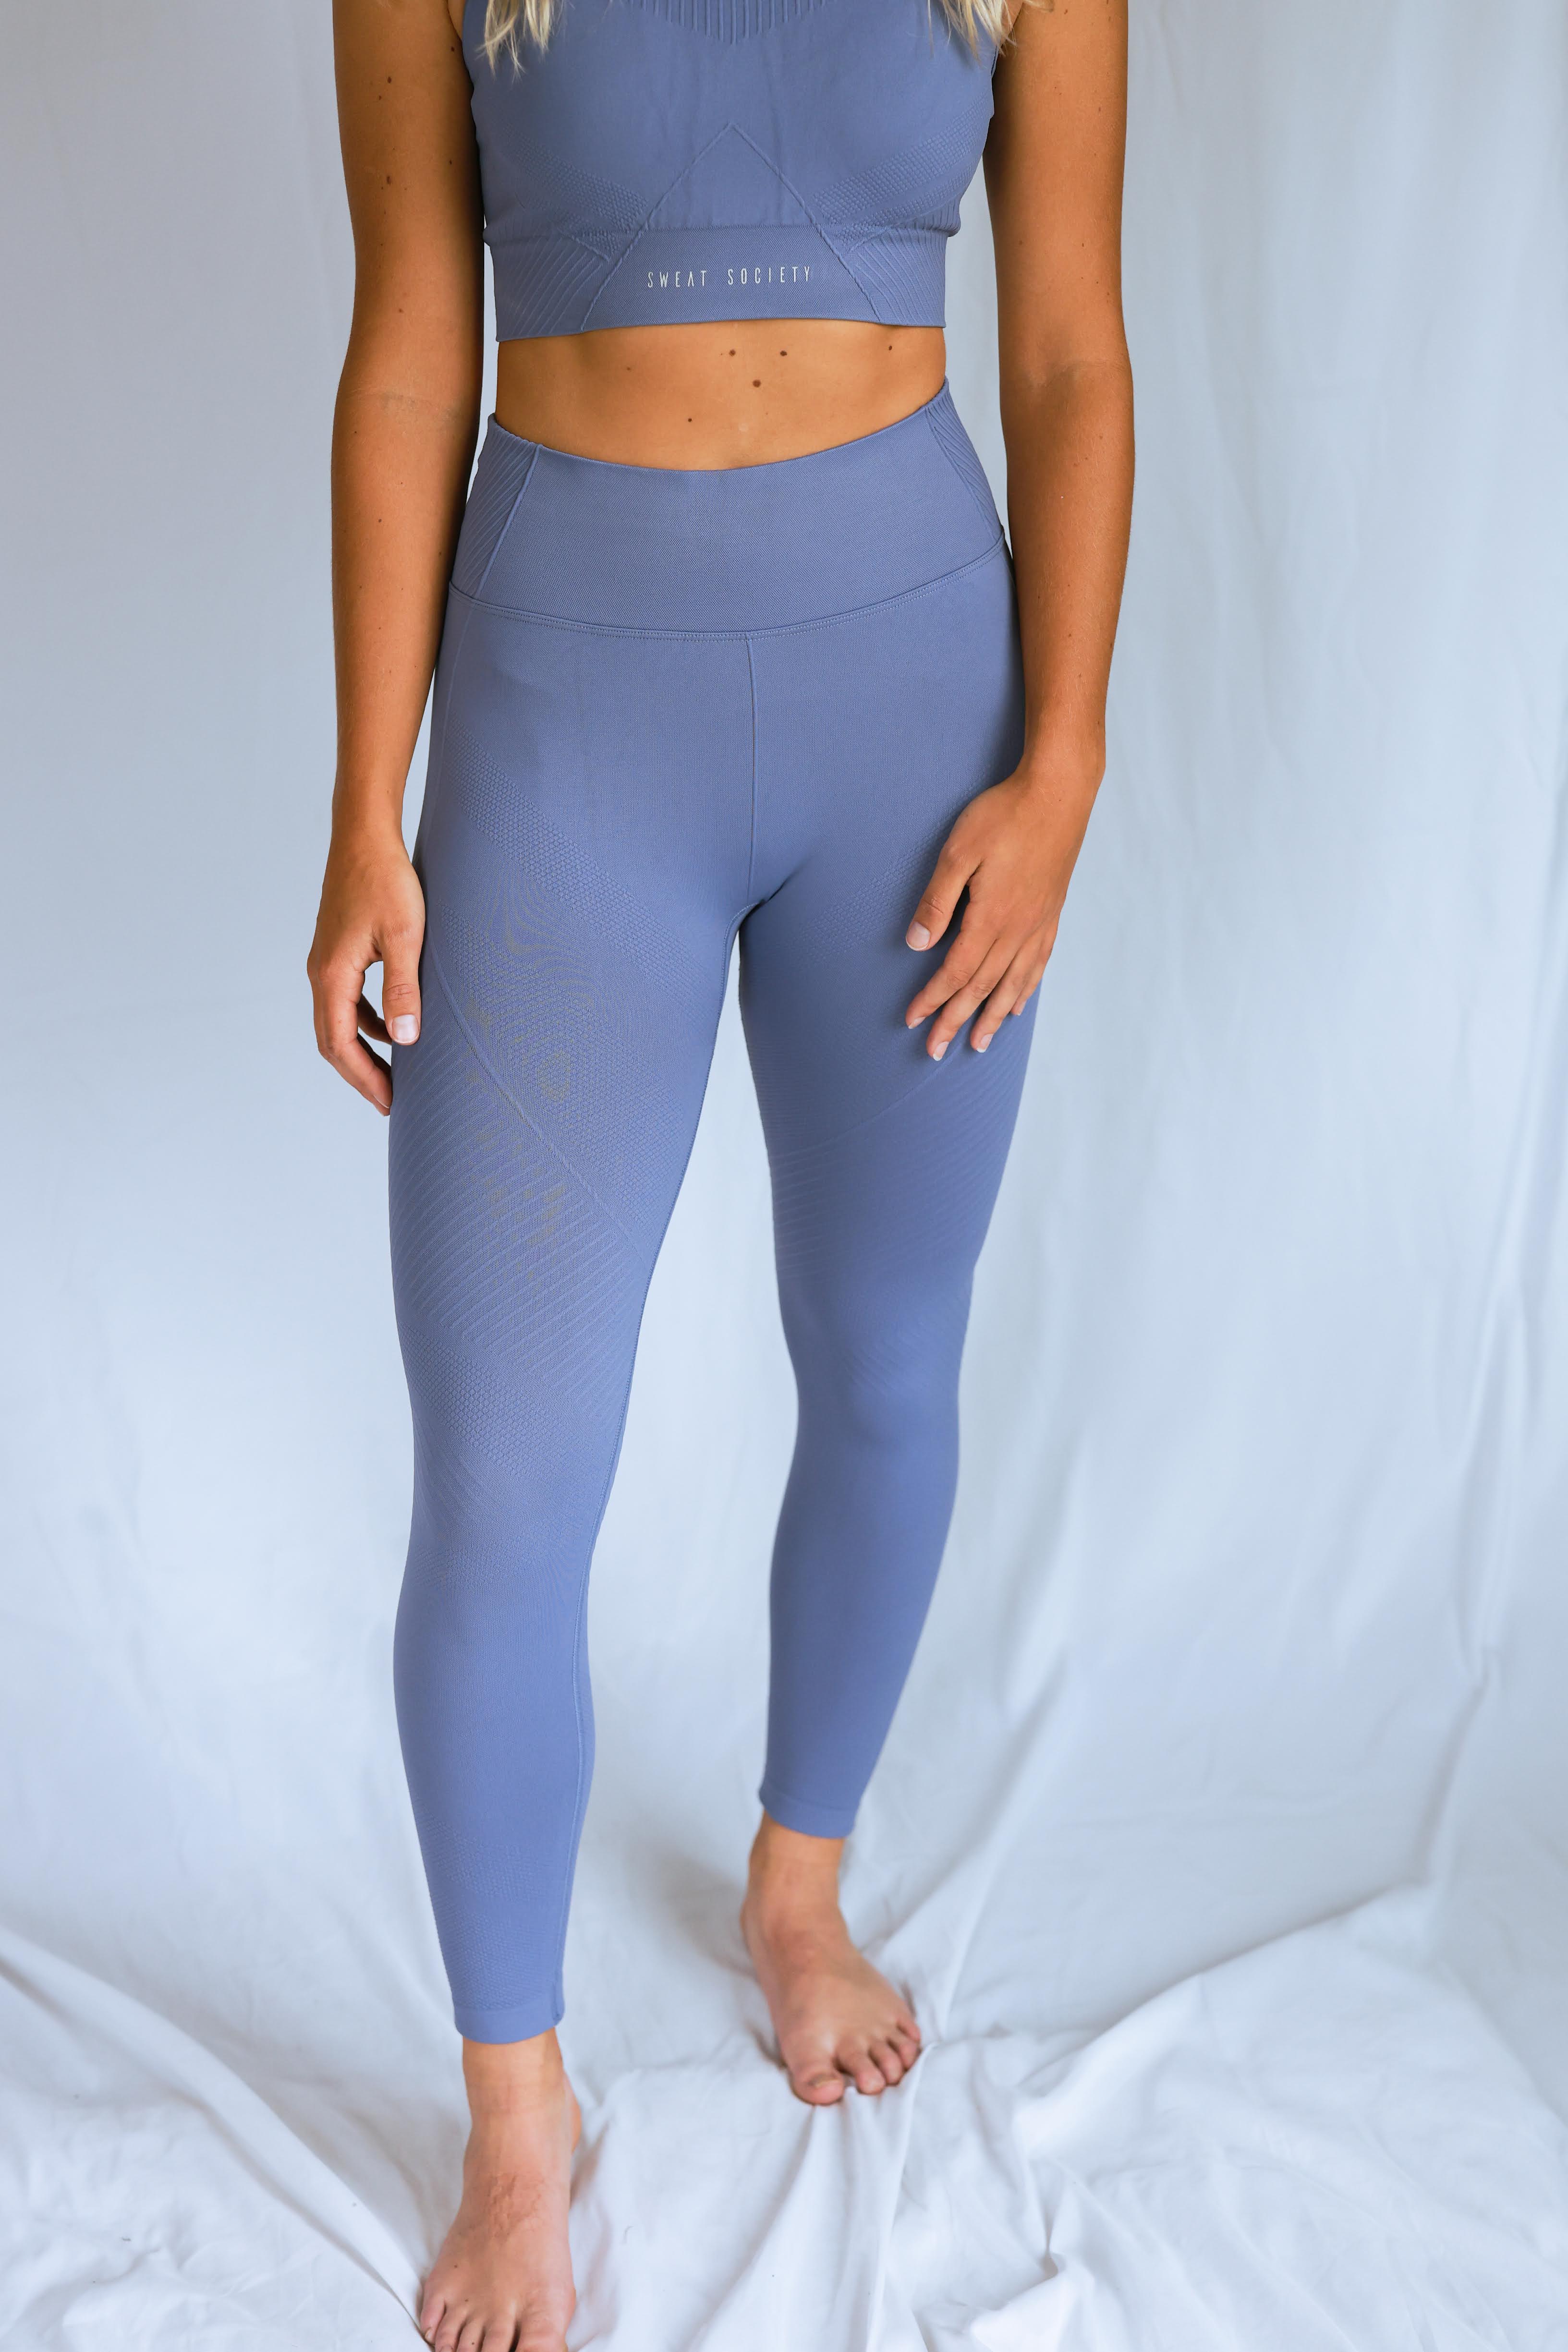 Move Your Body - Seamless Leggings – The Sweat Society